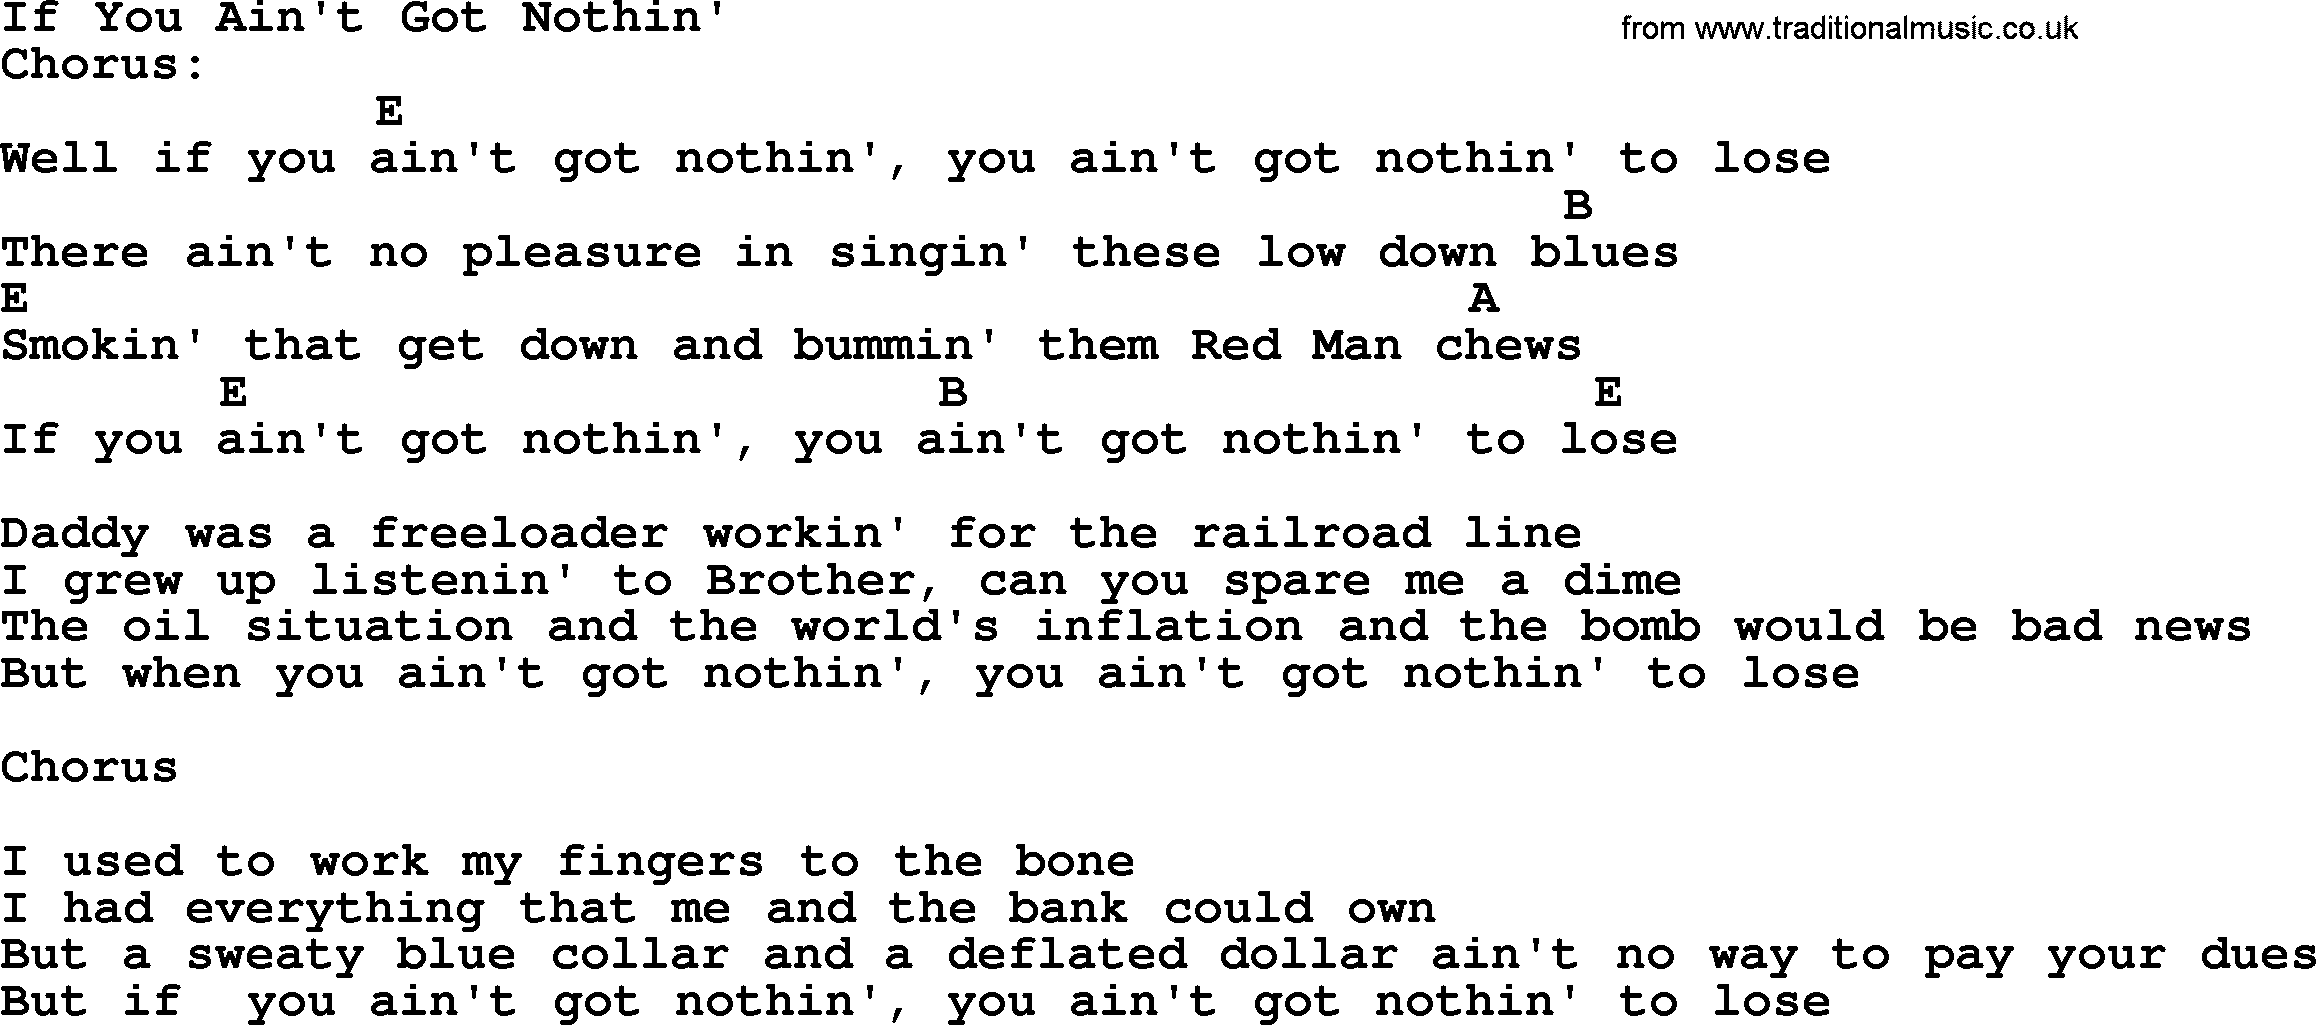 Bluegrass song: If You Ain't Got Nothin', lyrics and chords